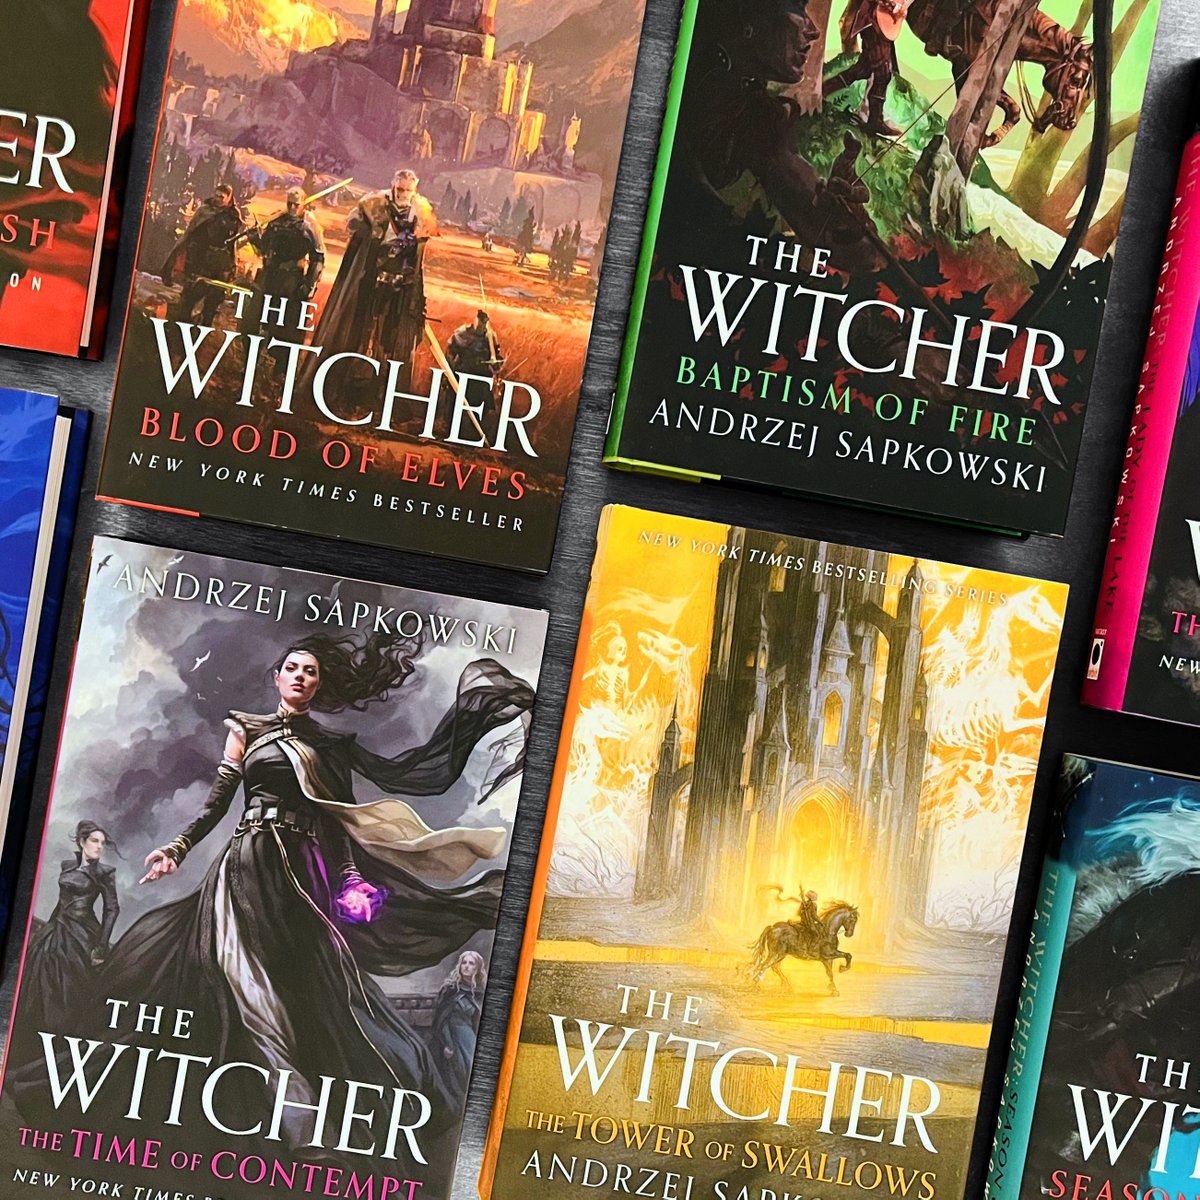 The Witcher is one of Forbes's '30 Greatest Book Series Of All Time!' #readthewitcher bit.ly/3xzIkoo